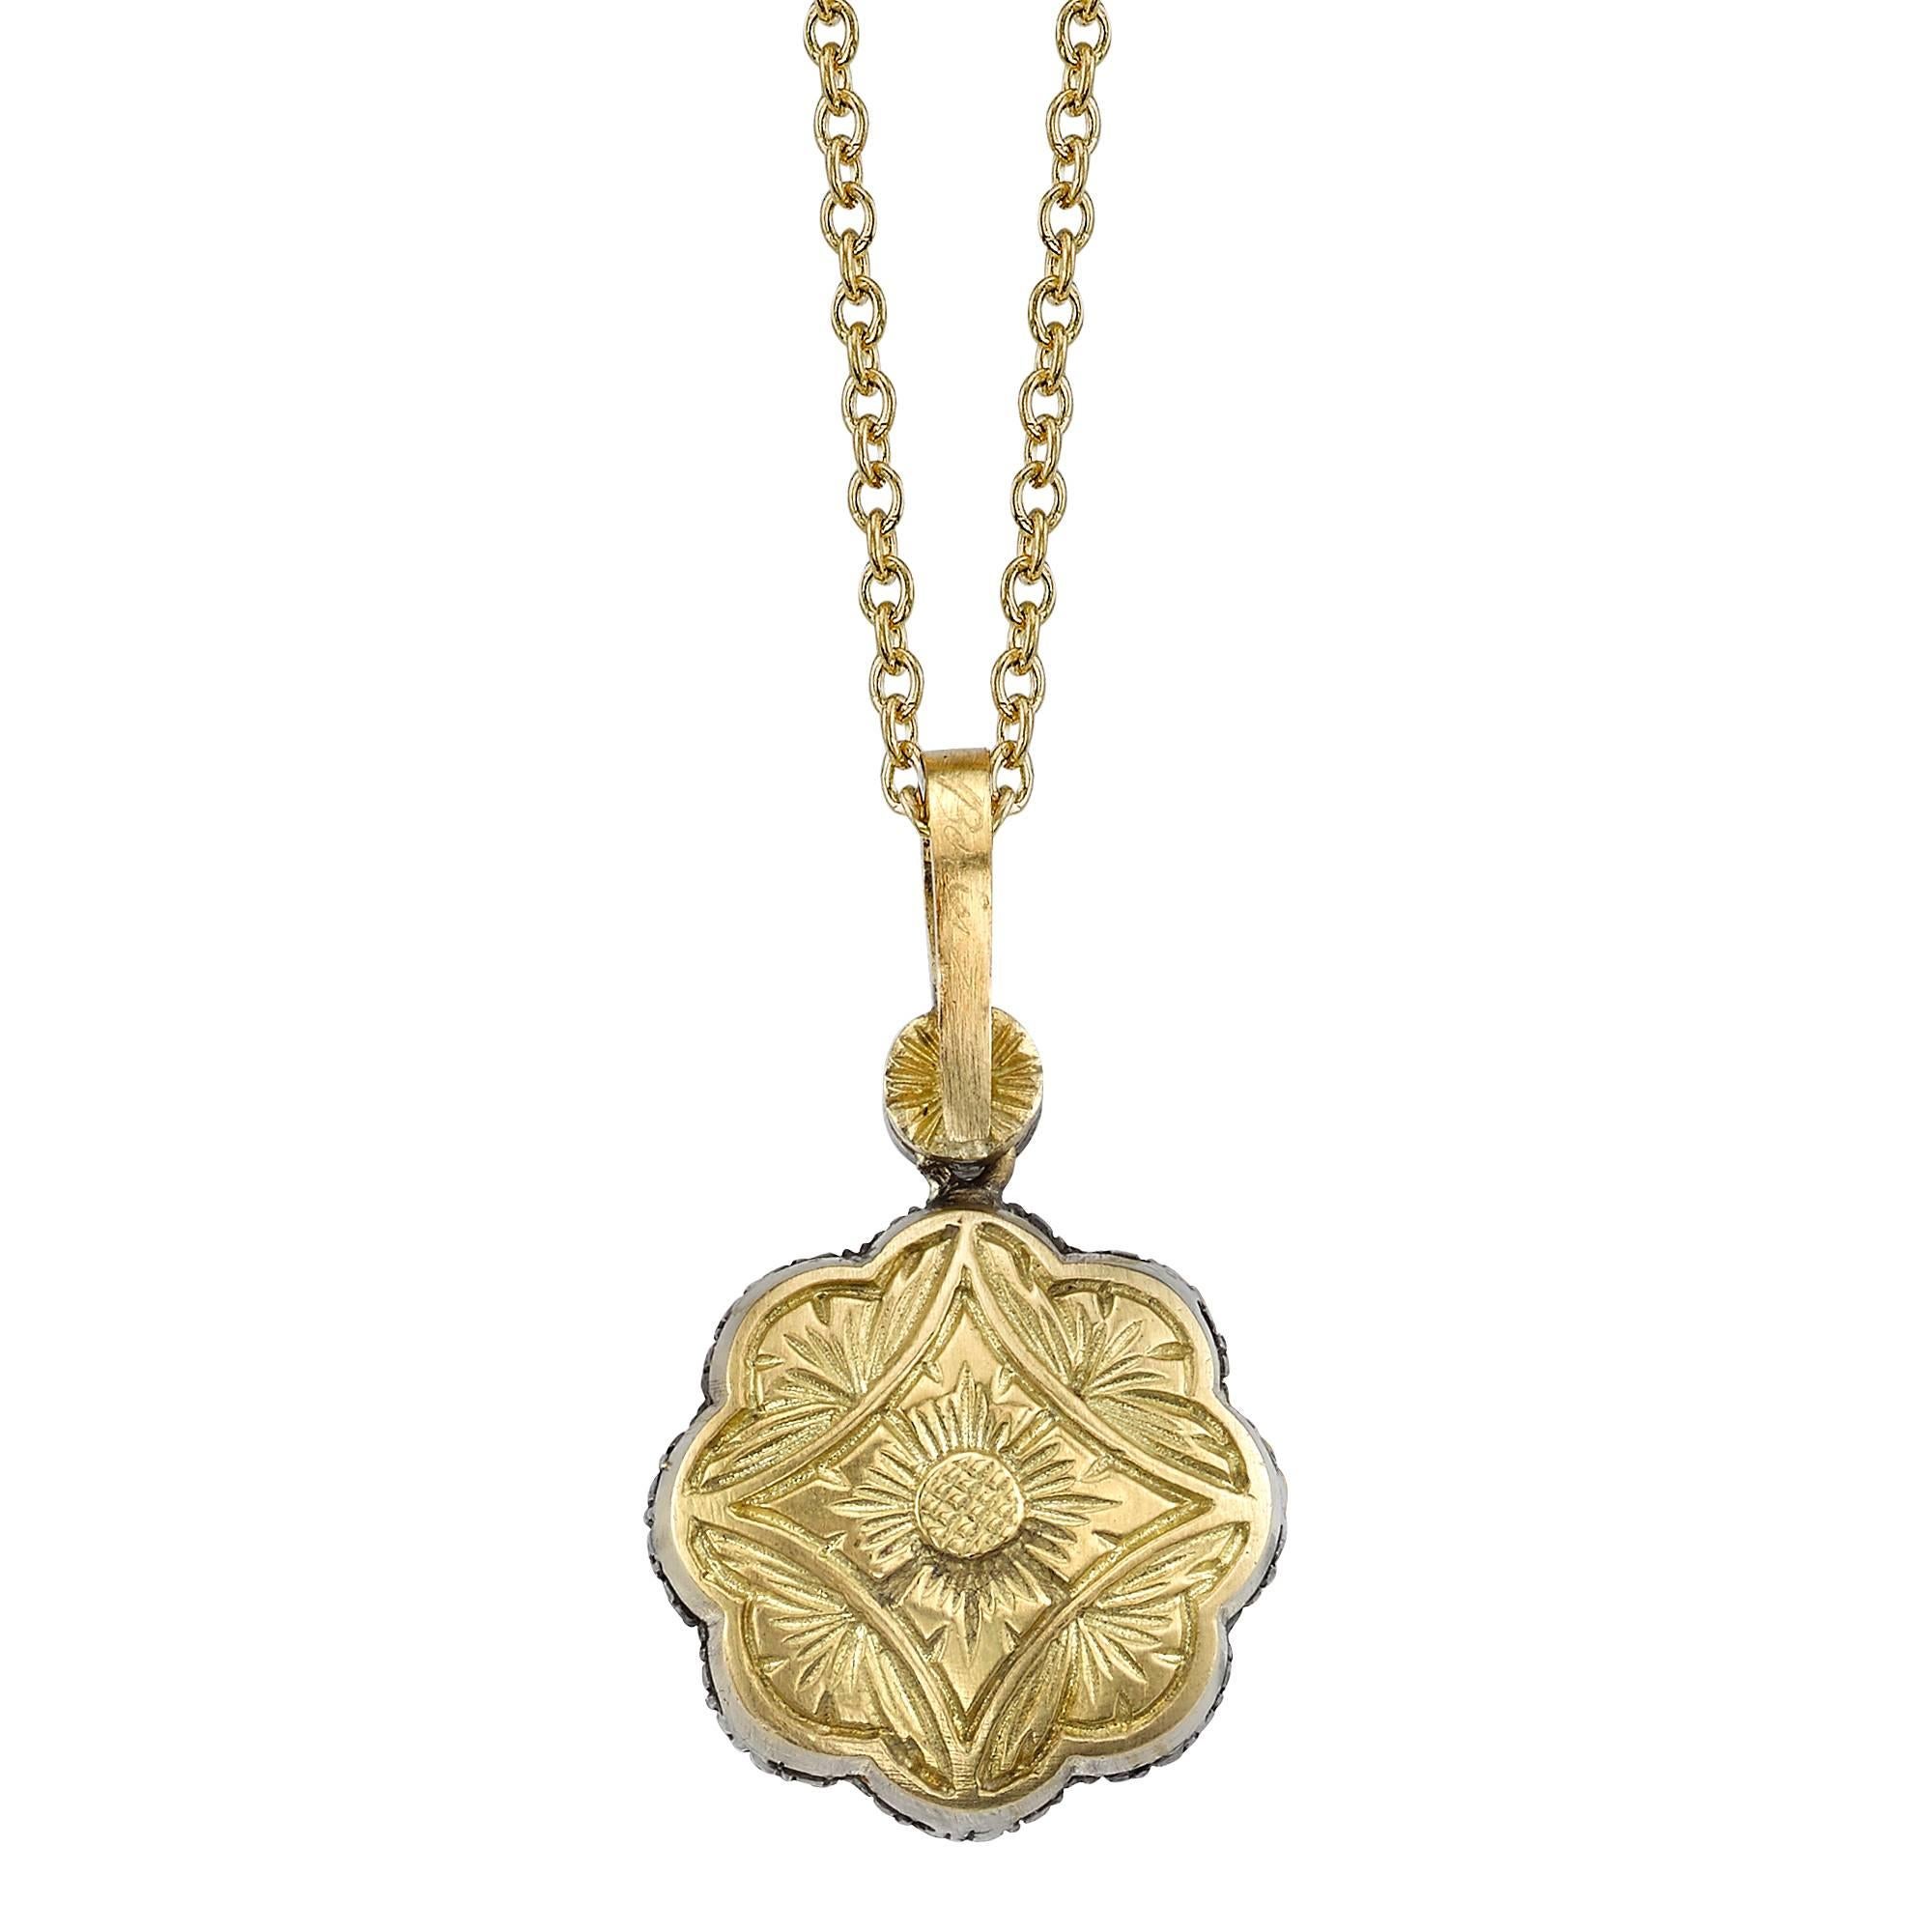 18 Karat Yellow Gold Necklace with a .56 CT Rose Cut Center Diamond and 0.28 CT Round Brilliant Cut Diamonds, accented with an Antique Silver Patina Finish. 

Inspired by the Edwardian Era, a time when fine jewelry was a crucial component of every